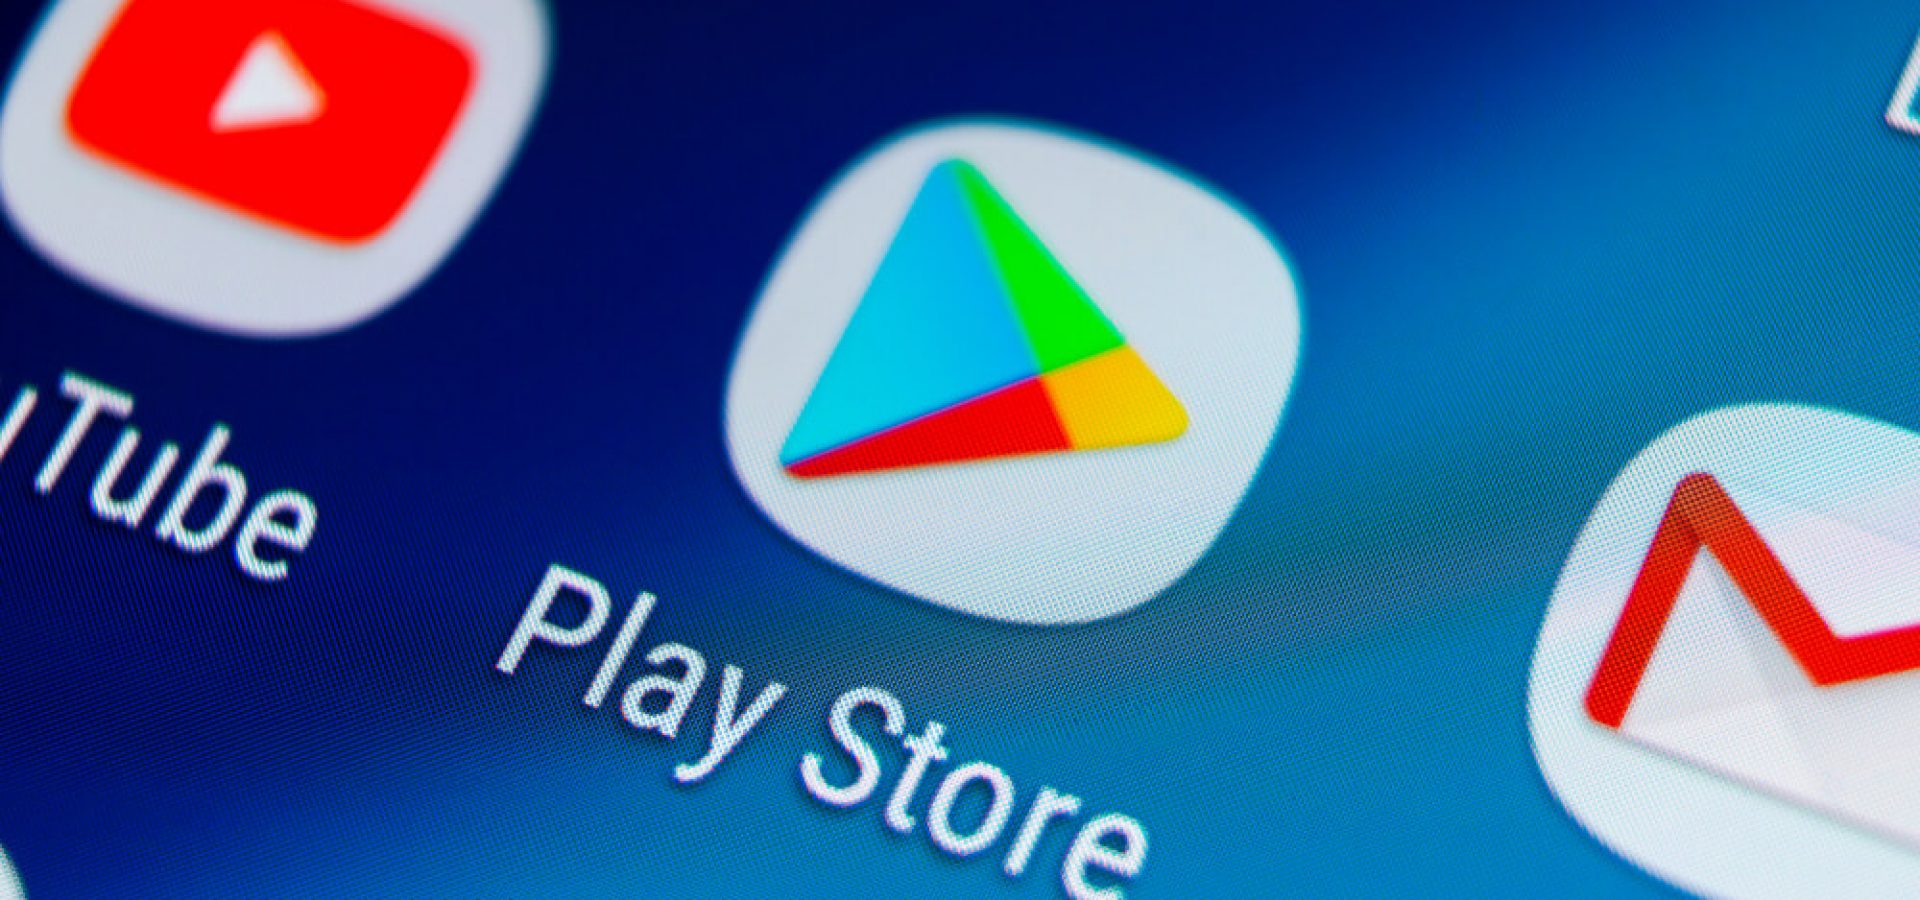 Play store application icon